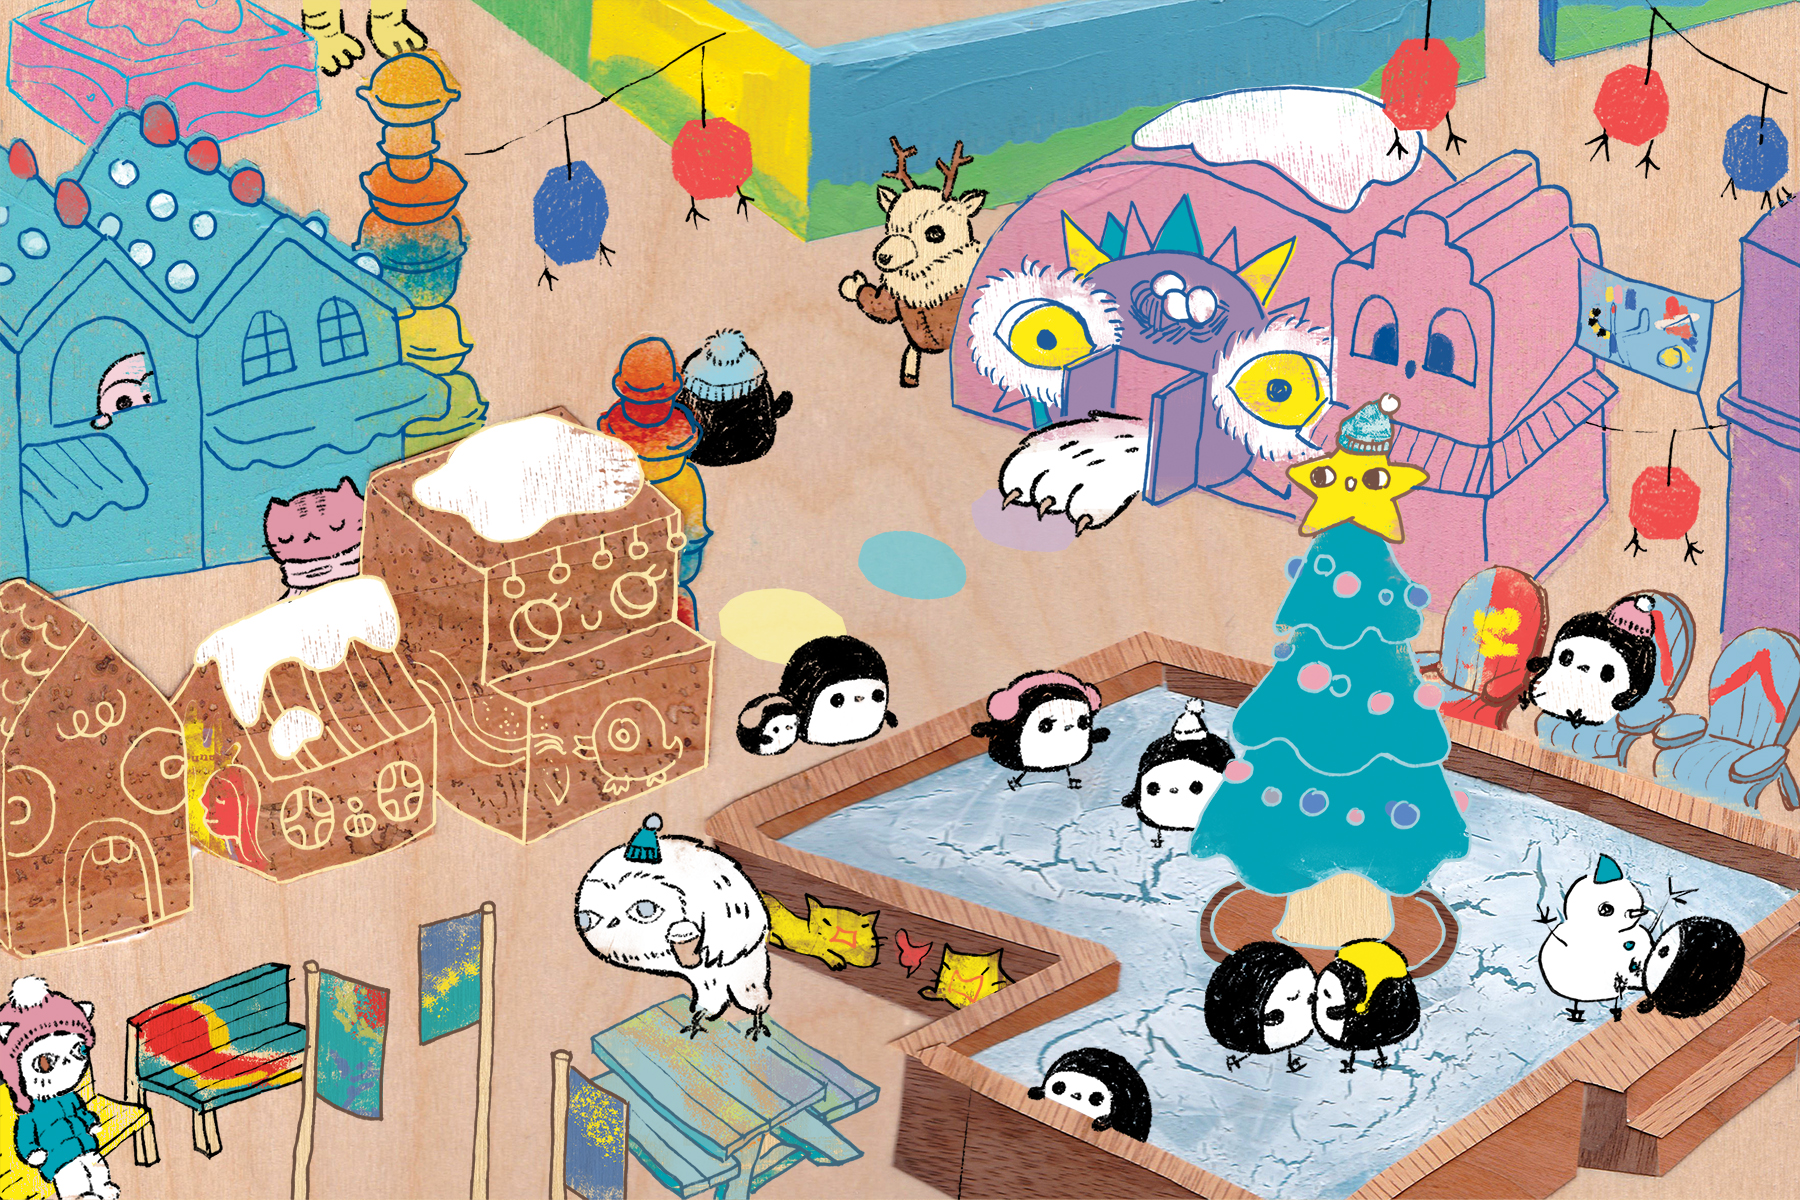 Colourful illustration by Hyein Lee, features a fun winter wonderland with easter eggs of STEPS projects from 2021 and cute penguins and winter monsters.